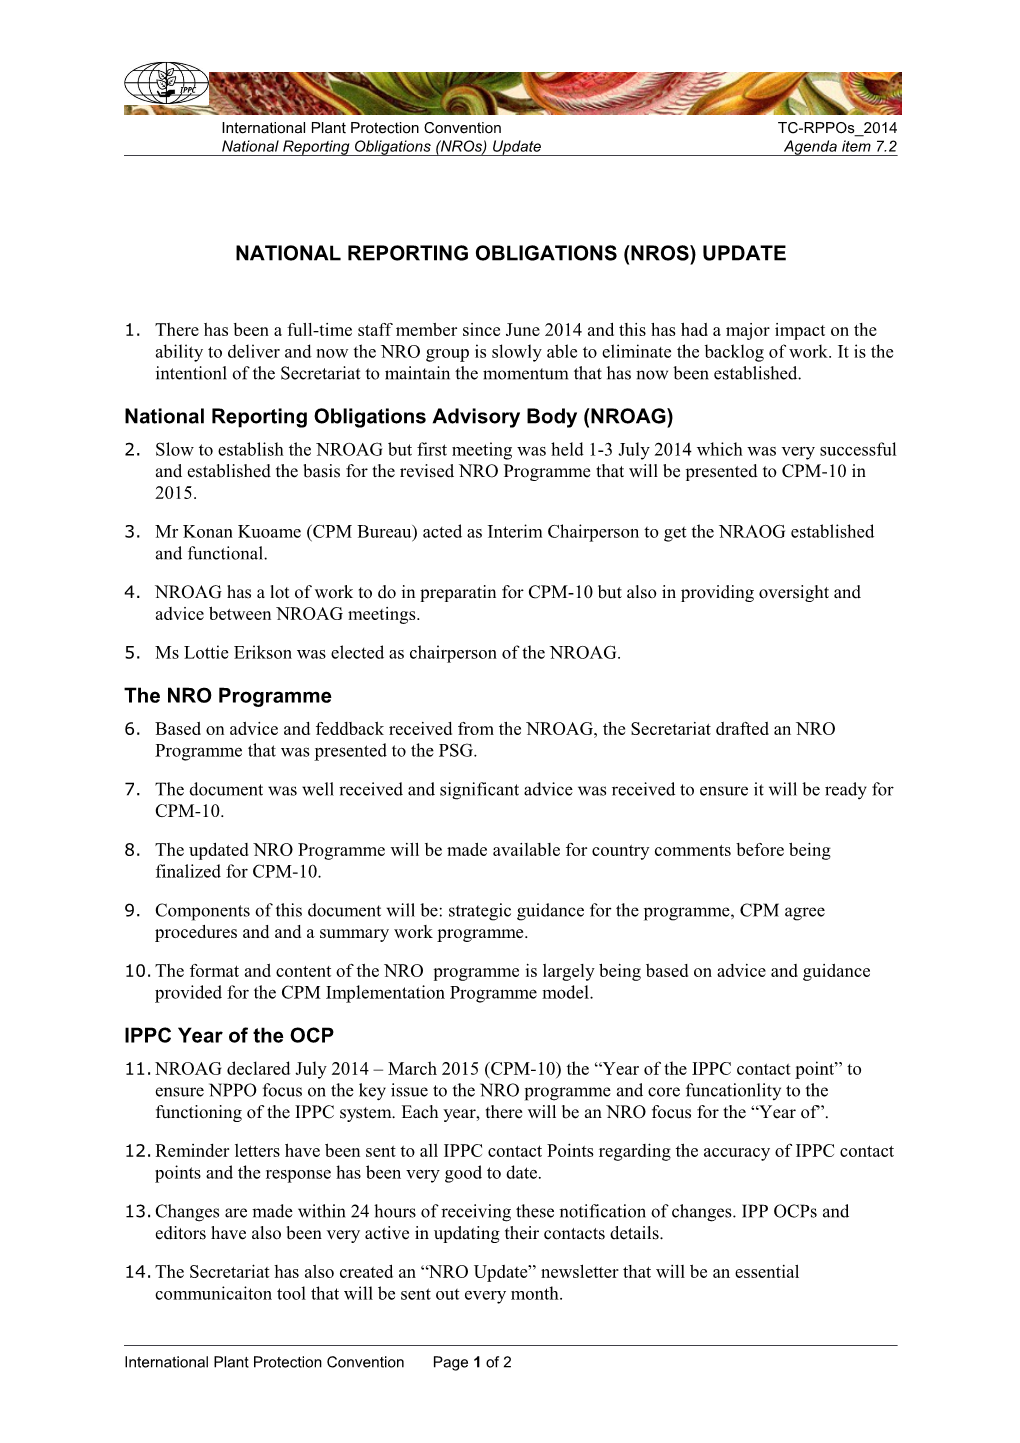 National Reporting Obligations (Nros) Update